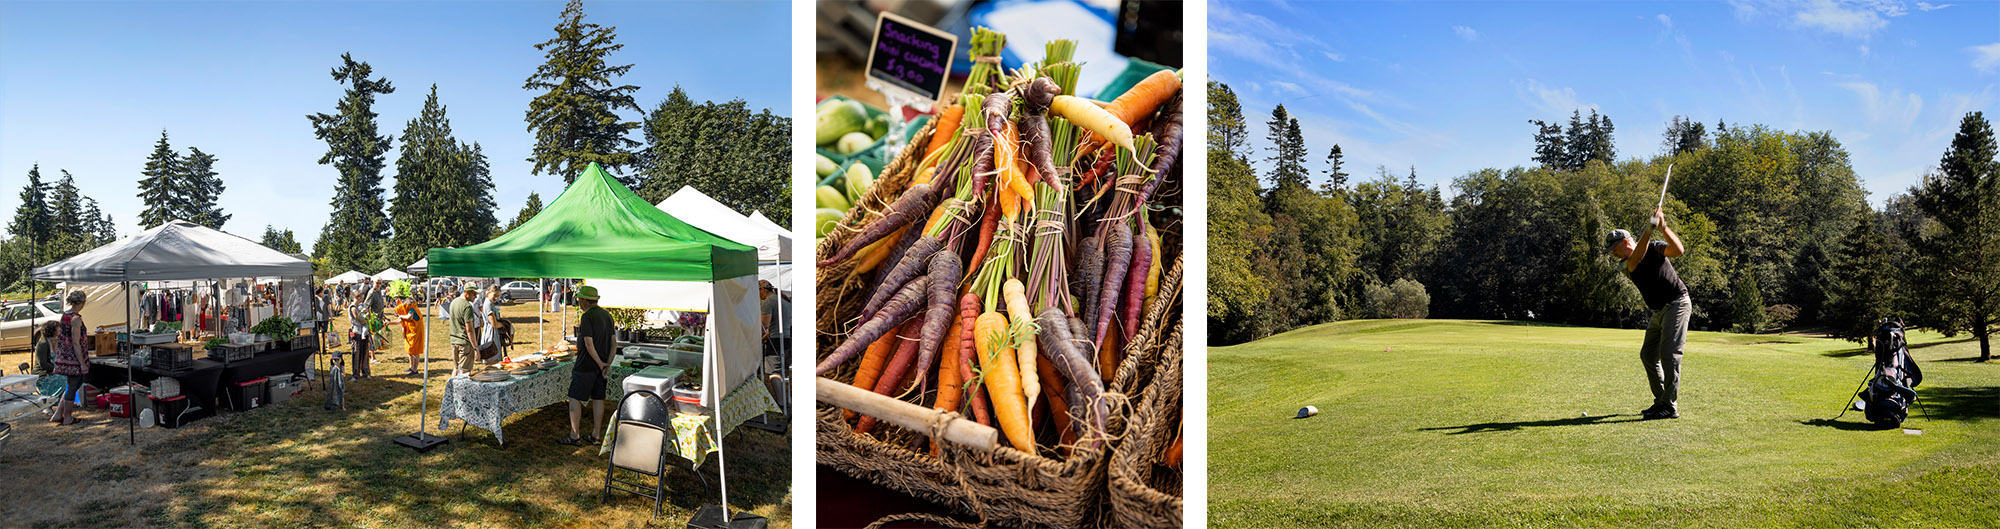 Farmers markets, natural organic produce and leisure opportunities abound.